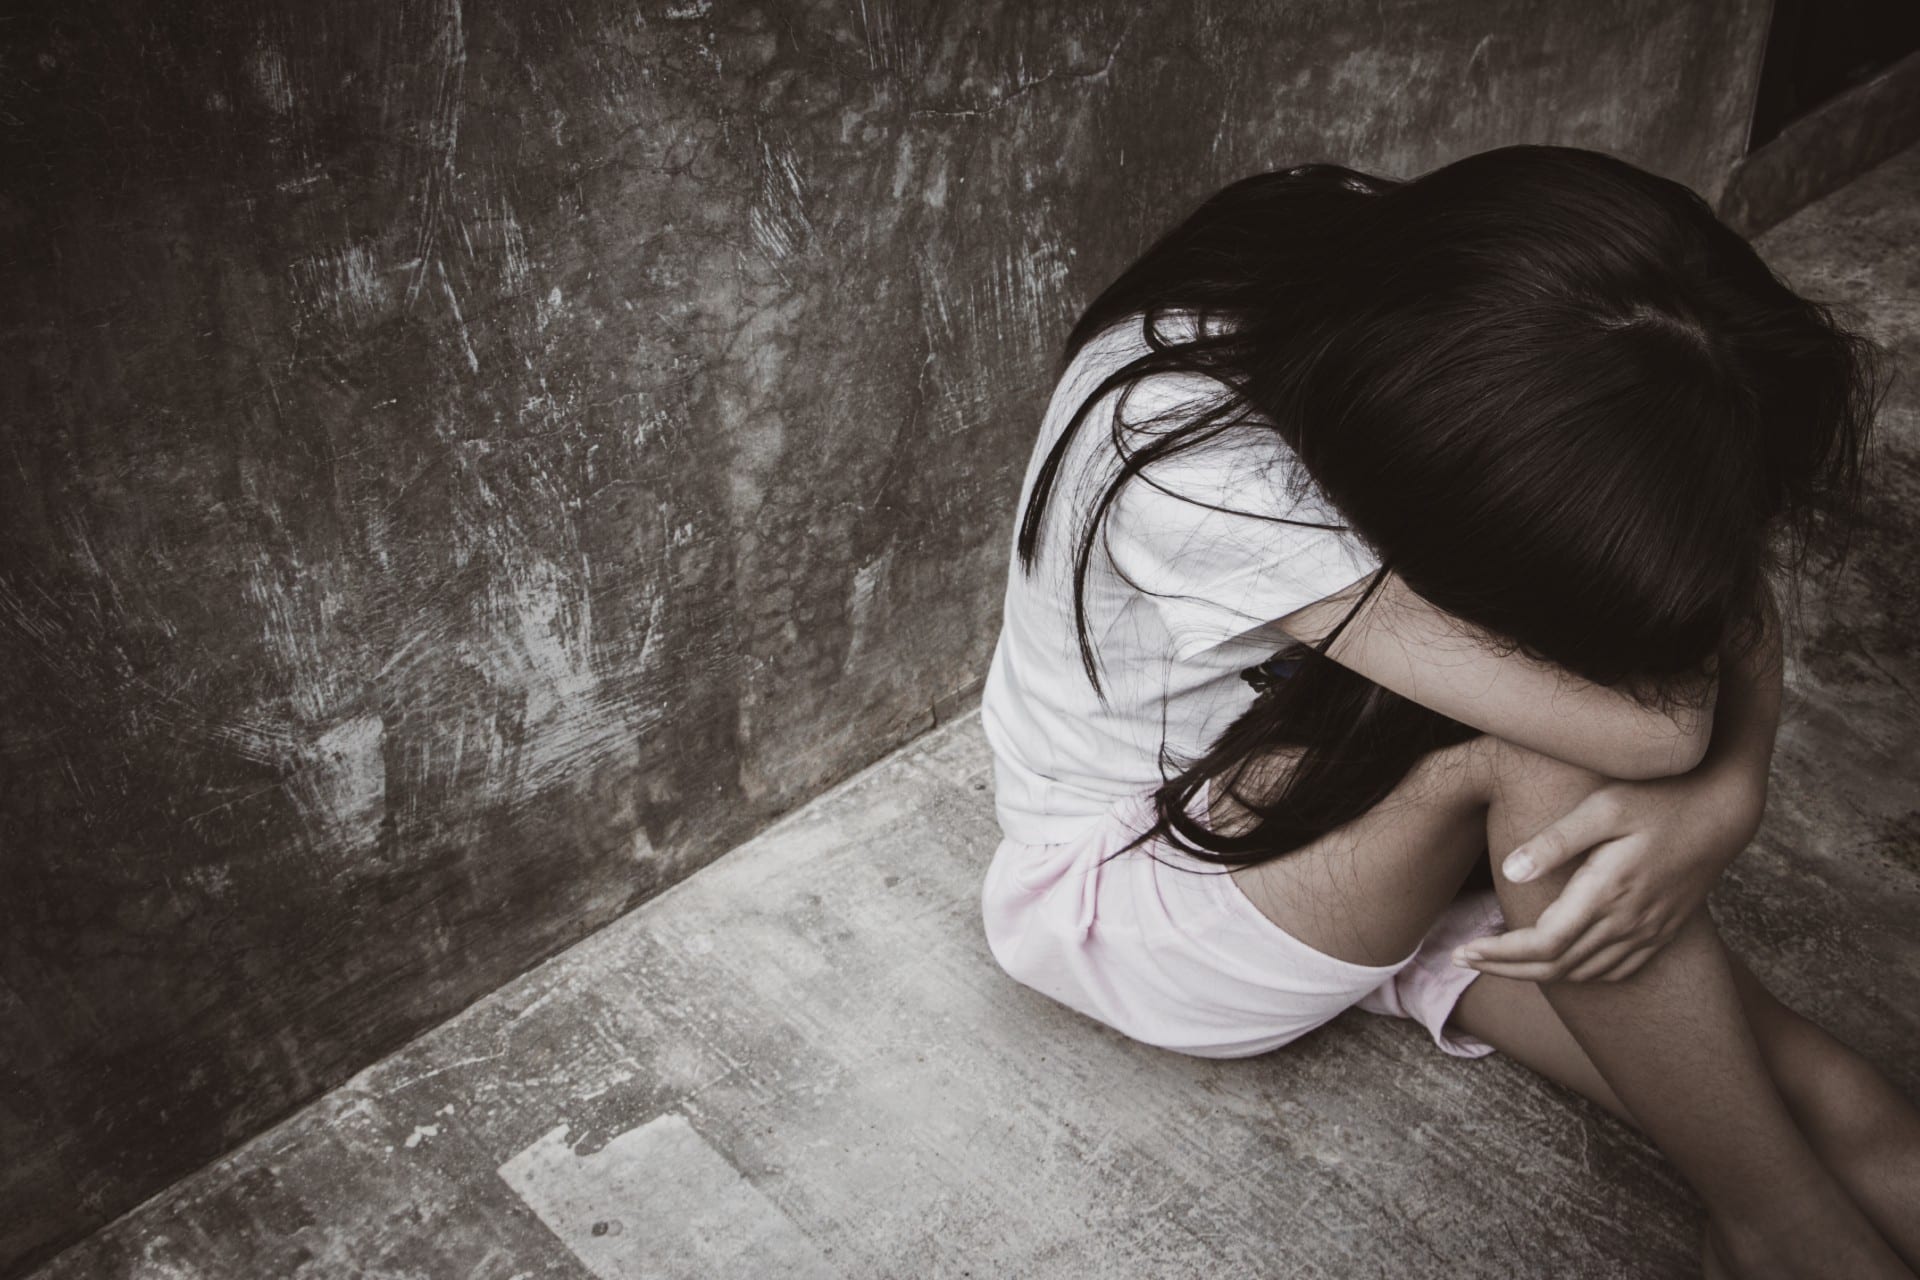 Florida Becomes First State to Teach Kids about Trafficking Prevention